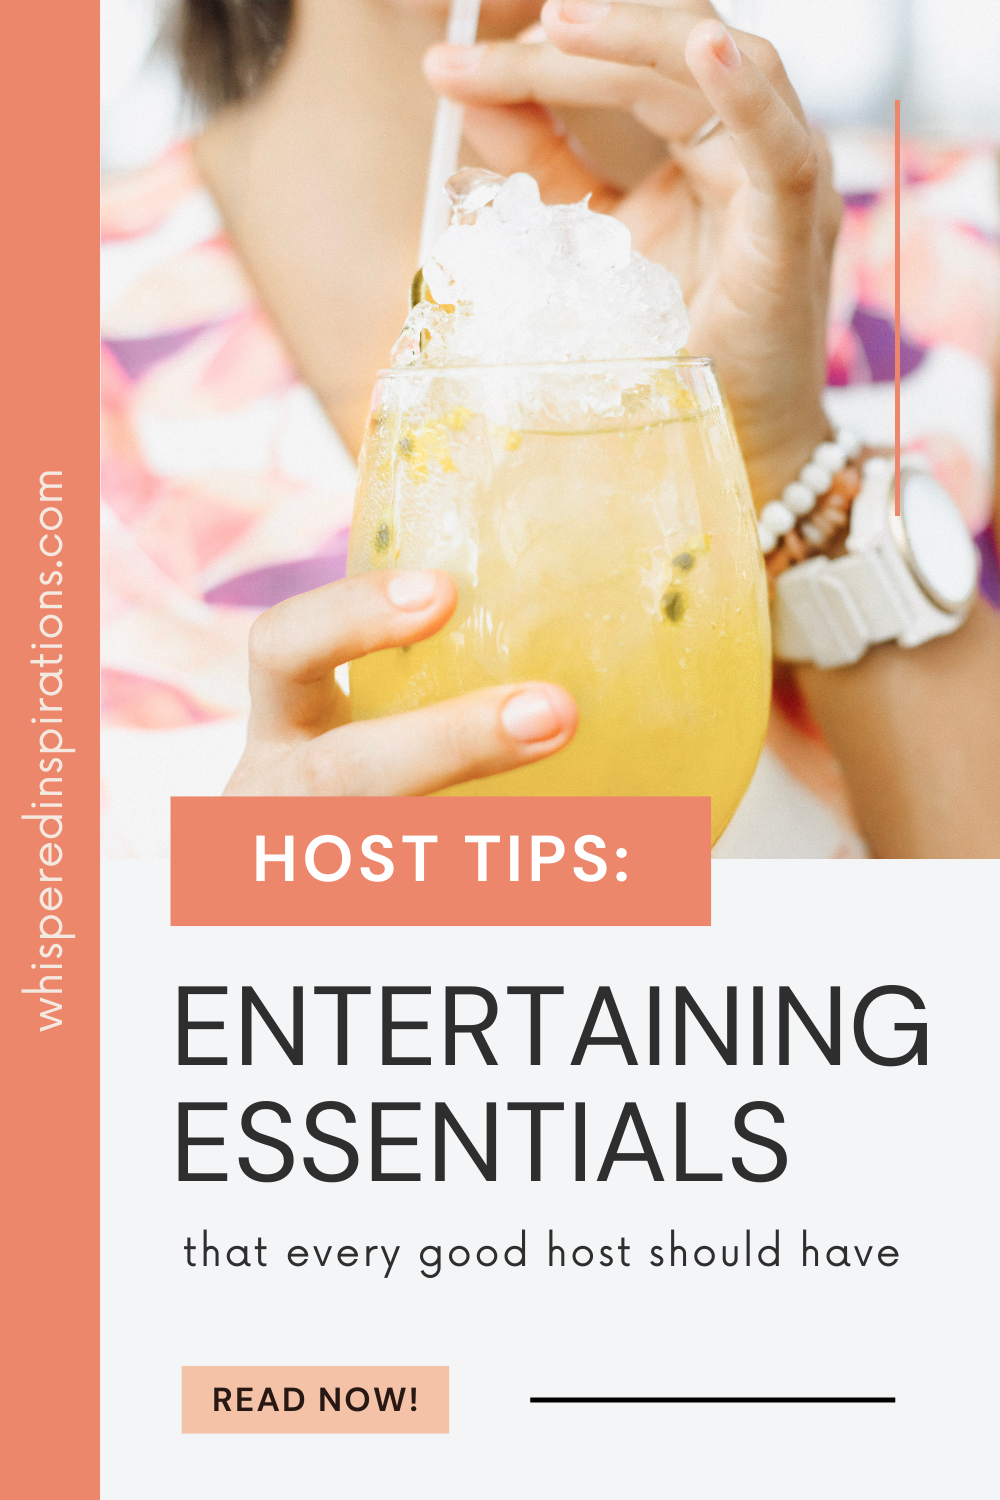 A woman's bottom half of her face is shown. She is smiling and holding a straw up to her mouth. She is drinking an orange cocktail with her pinky up. This article covers entertaining essentials every good host should have.